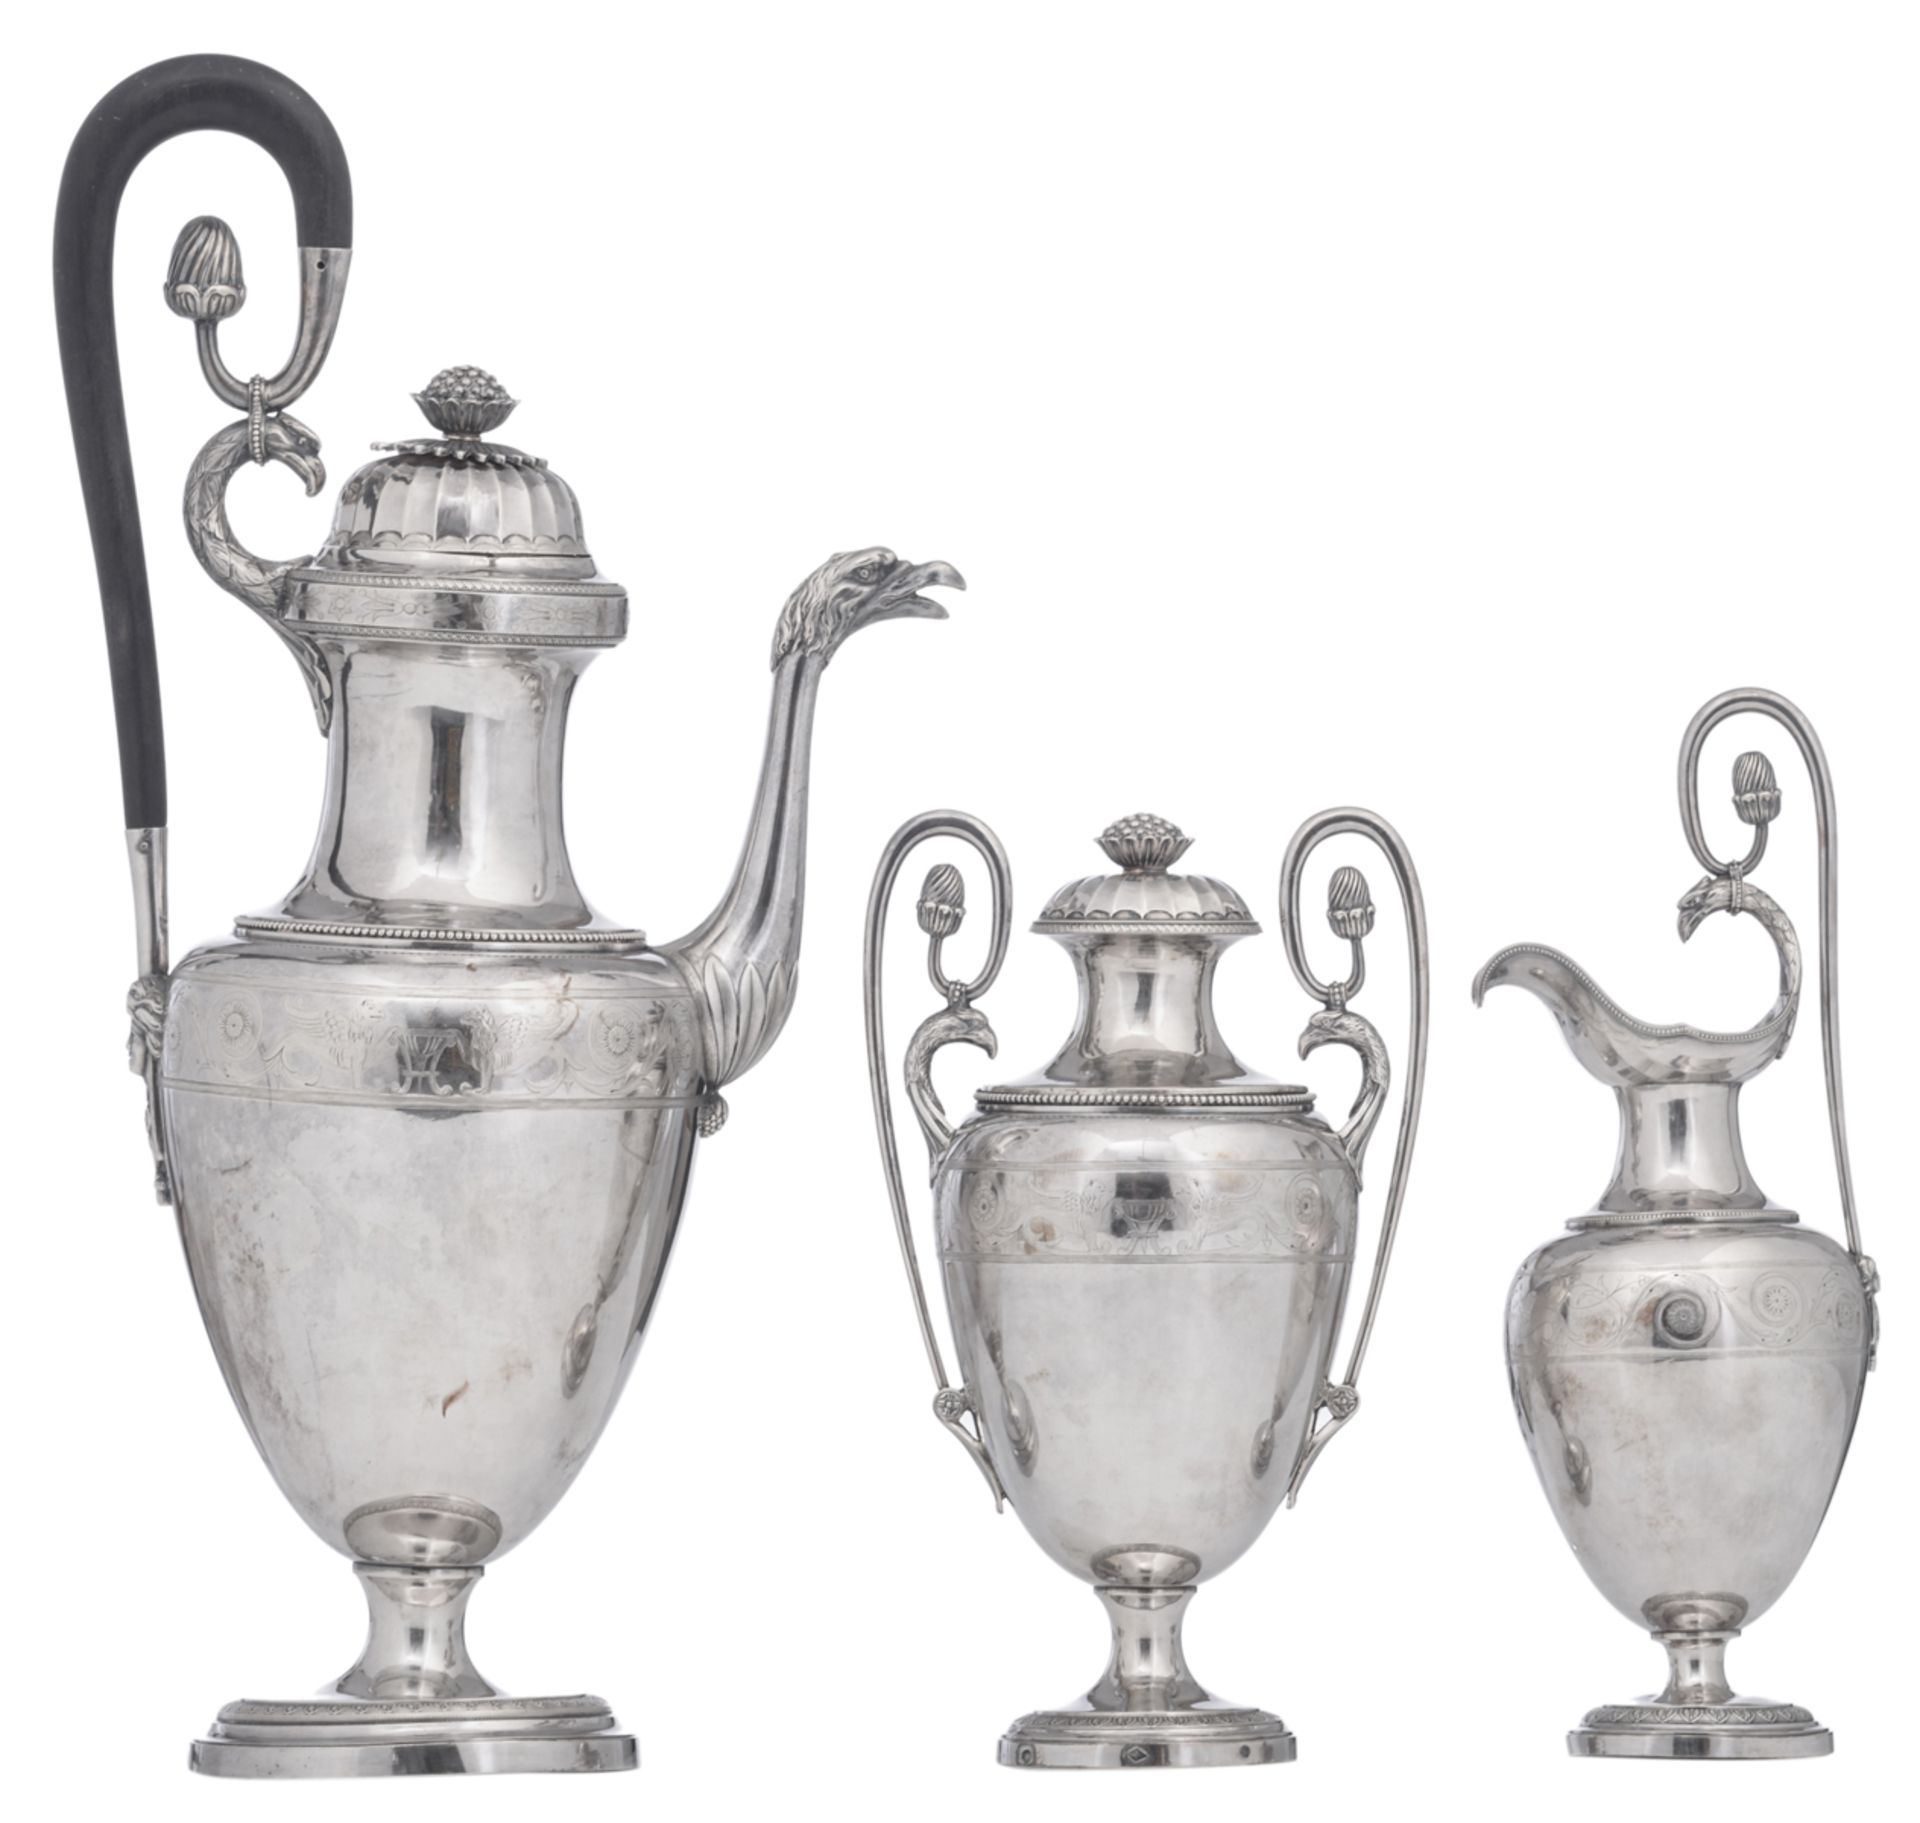 A Neoclassical three-part coffee set, marked 'Van de Acker', Brussels 1809 - 1814, H 39 - 24,5 -